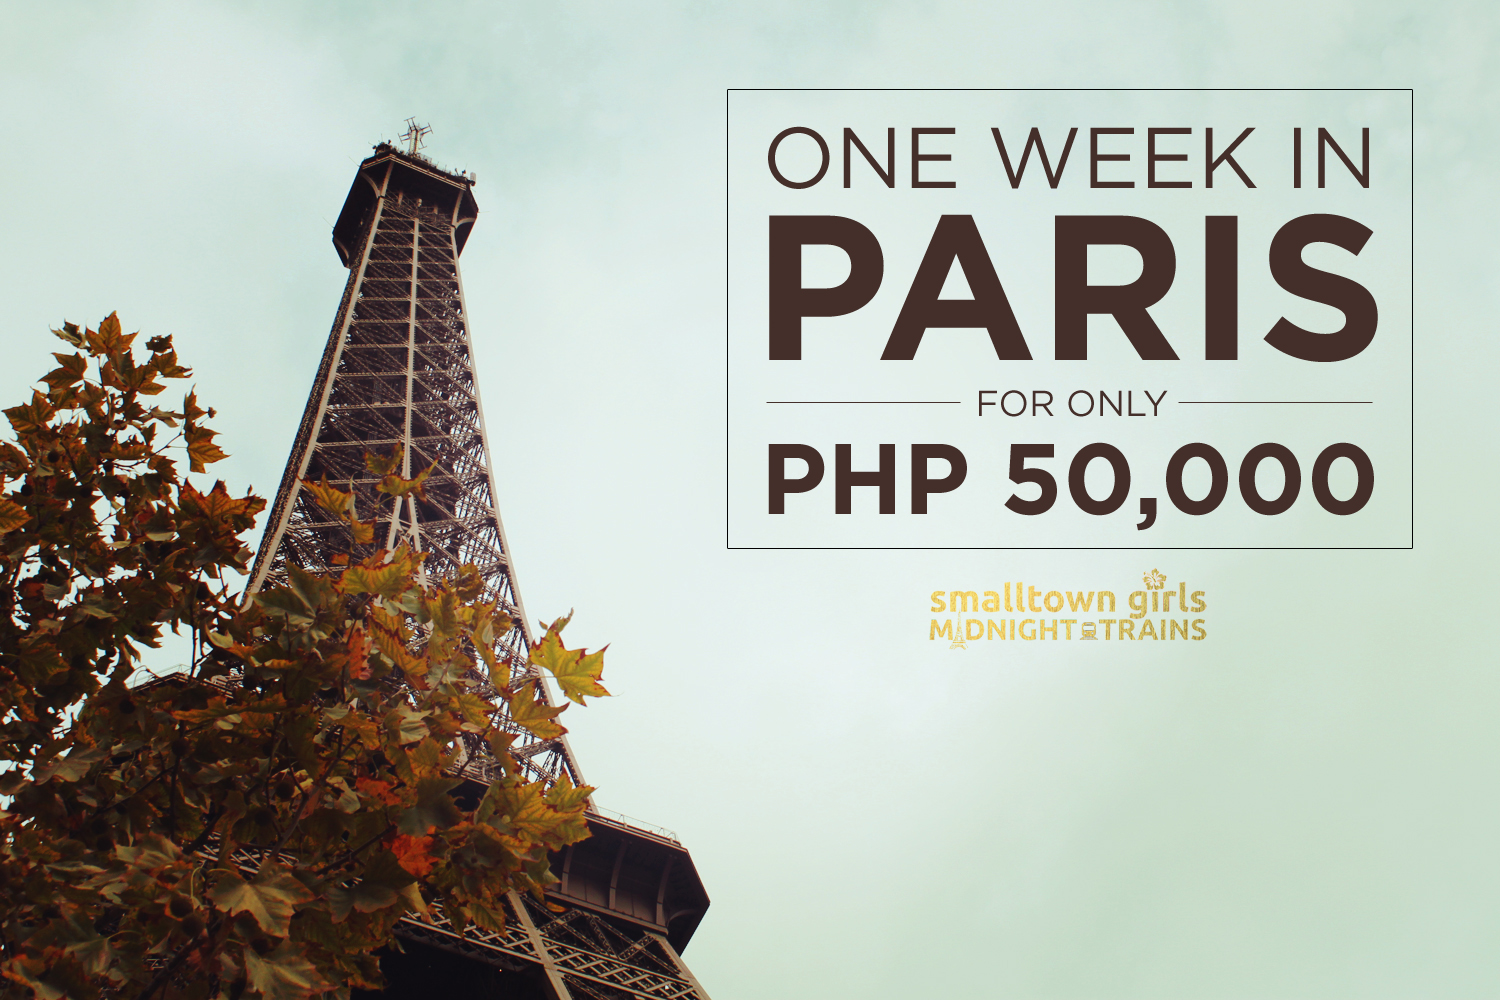 One week in Paris for only PHP 50,000